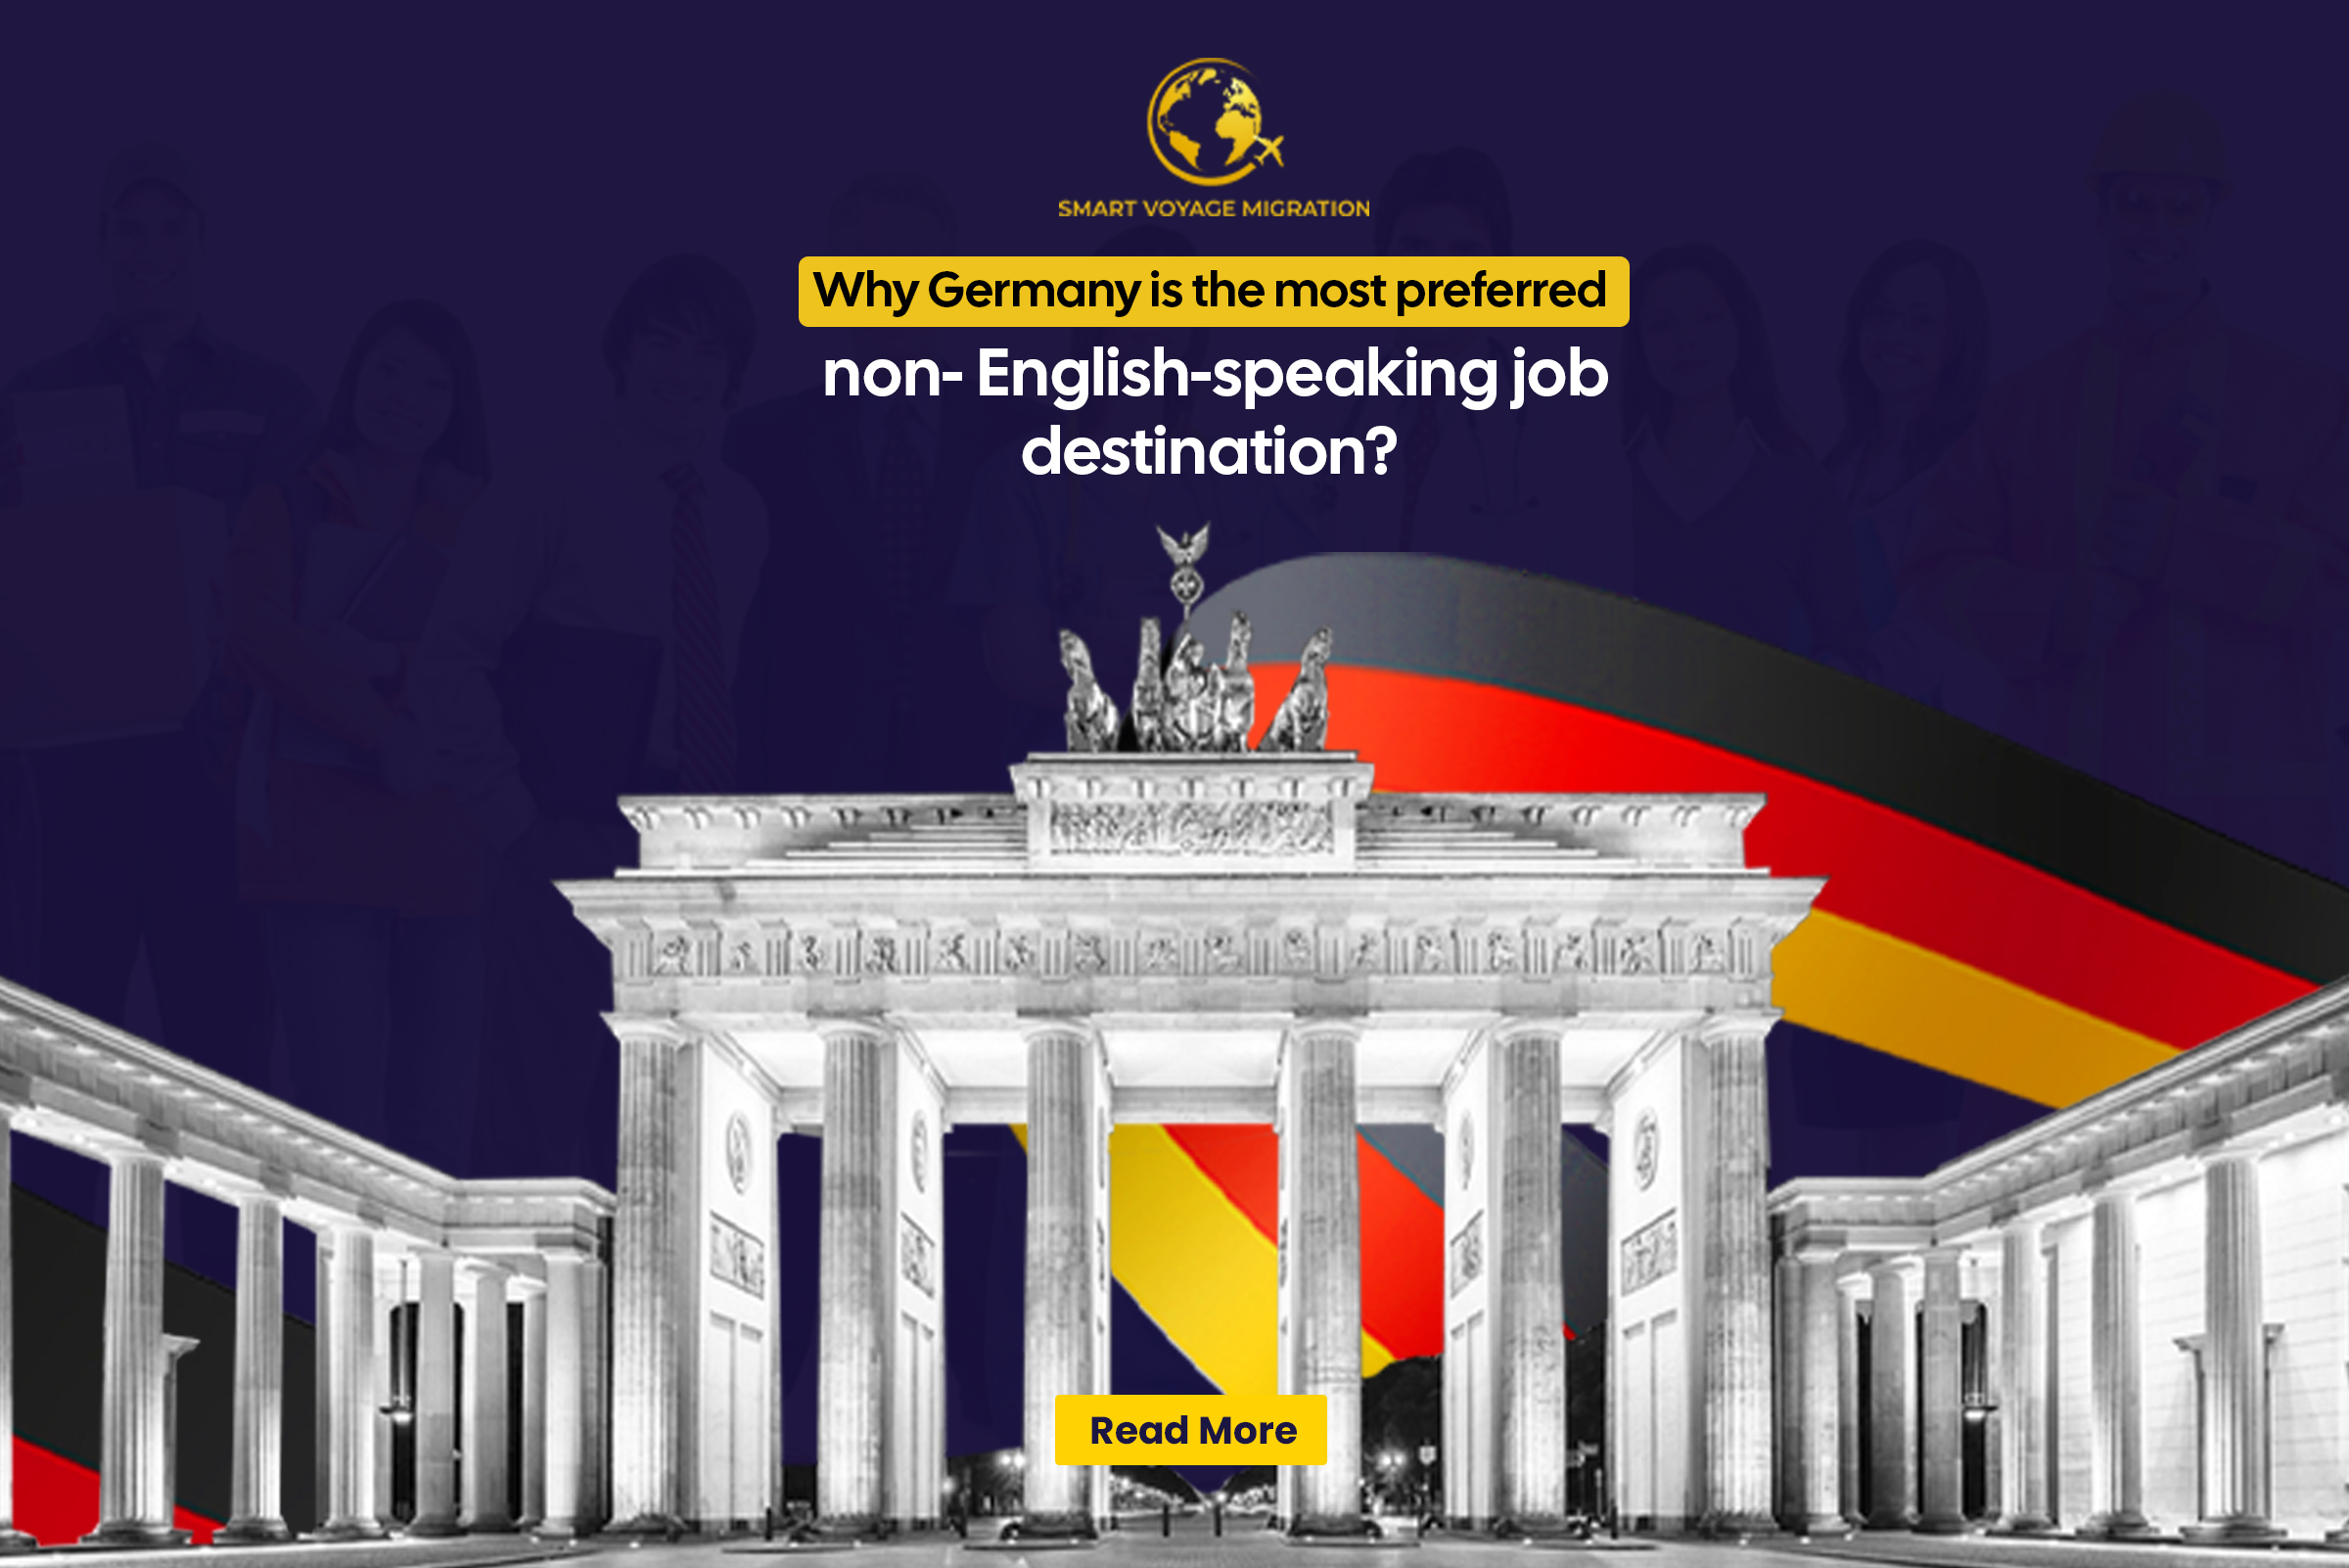 Why Germany is the most preferred non-English-speaking work destination?